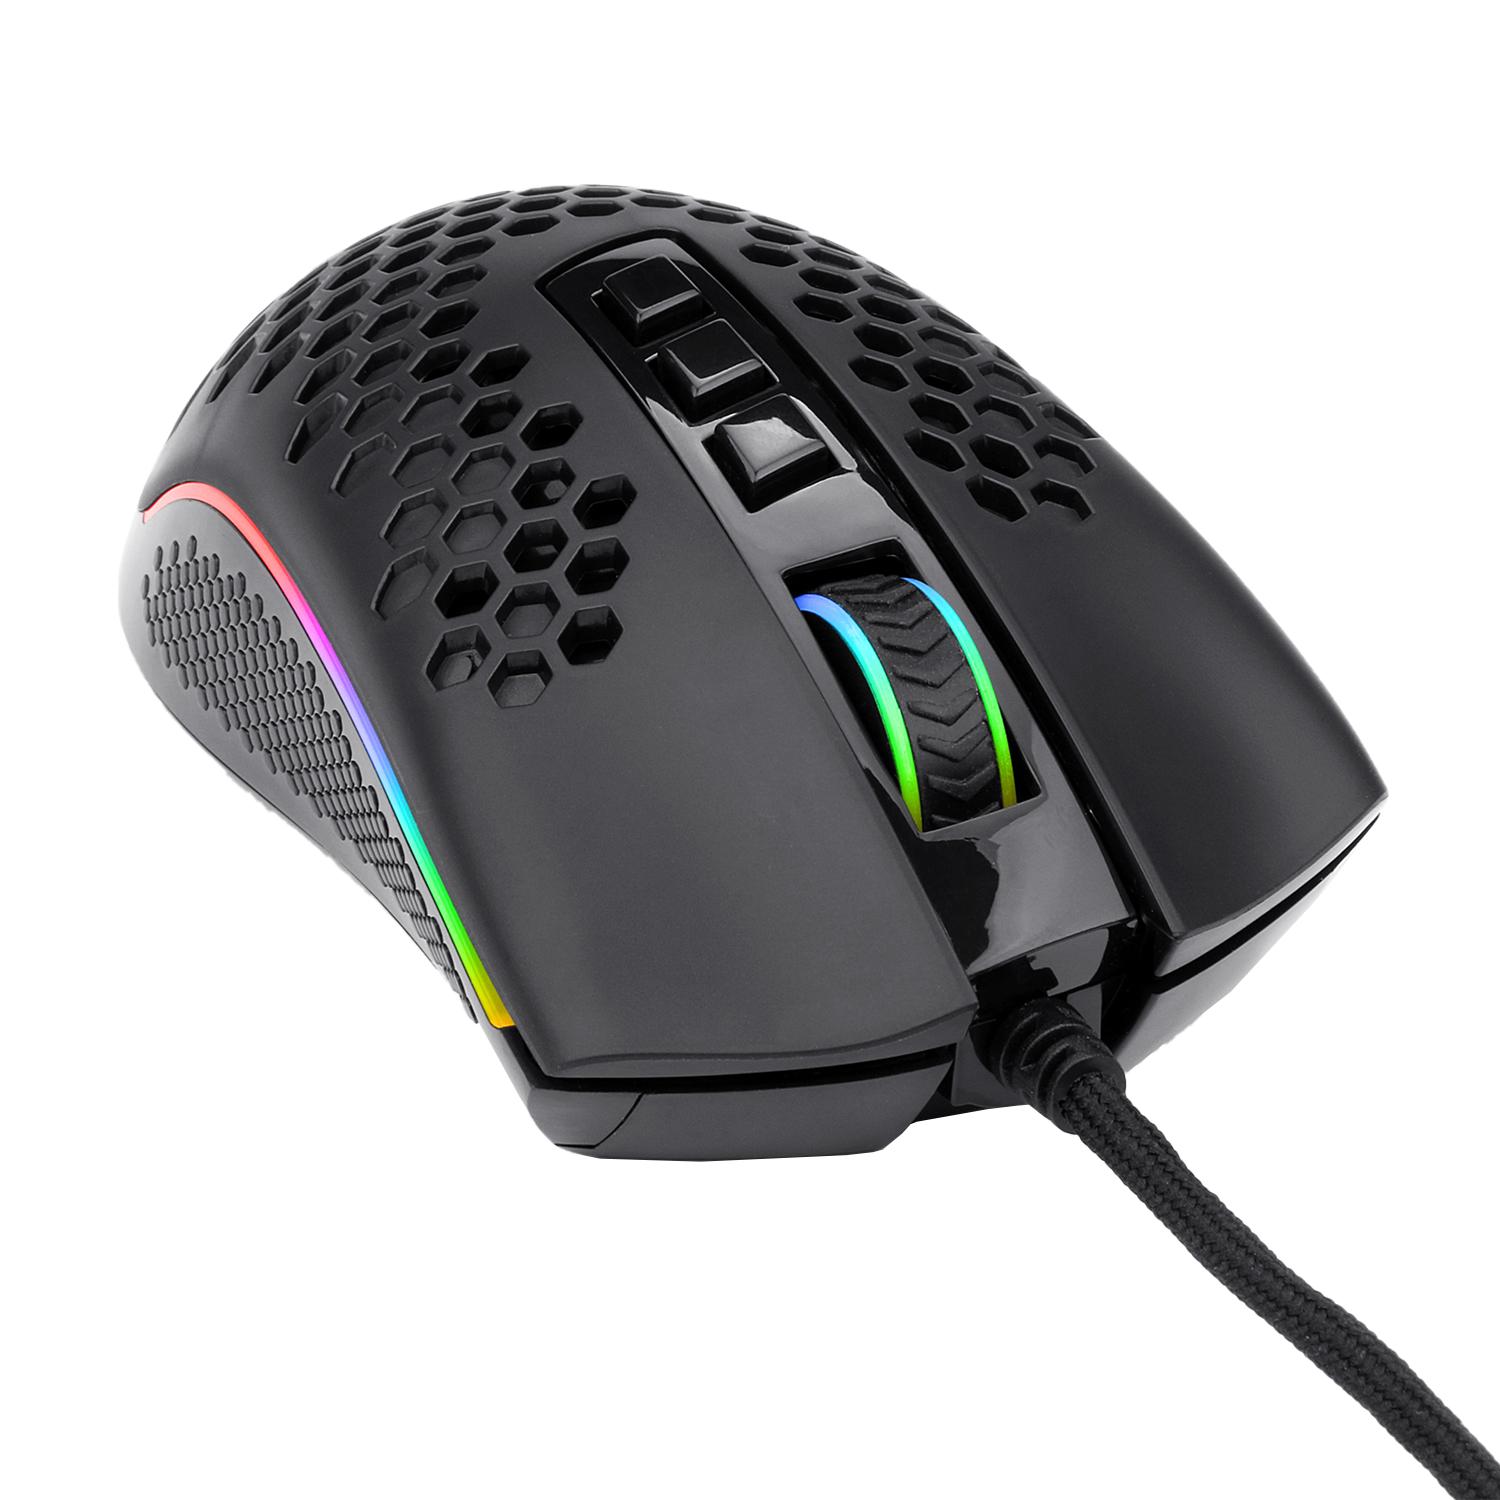 the lightest mouse